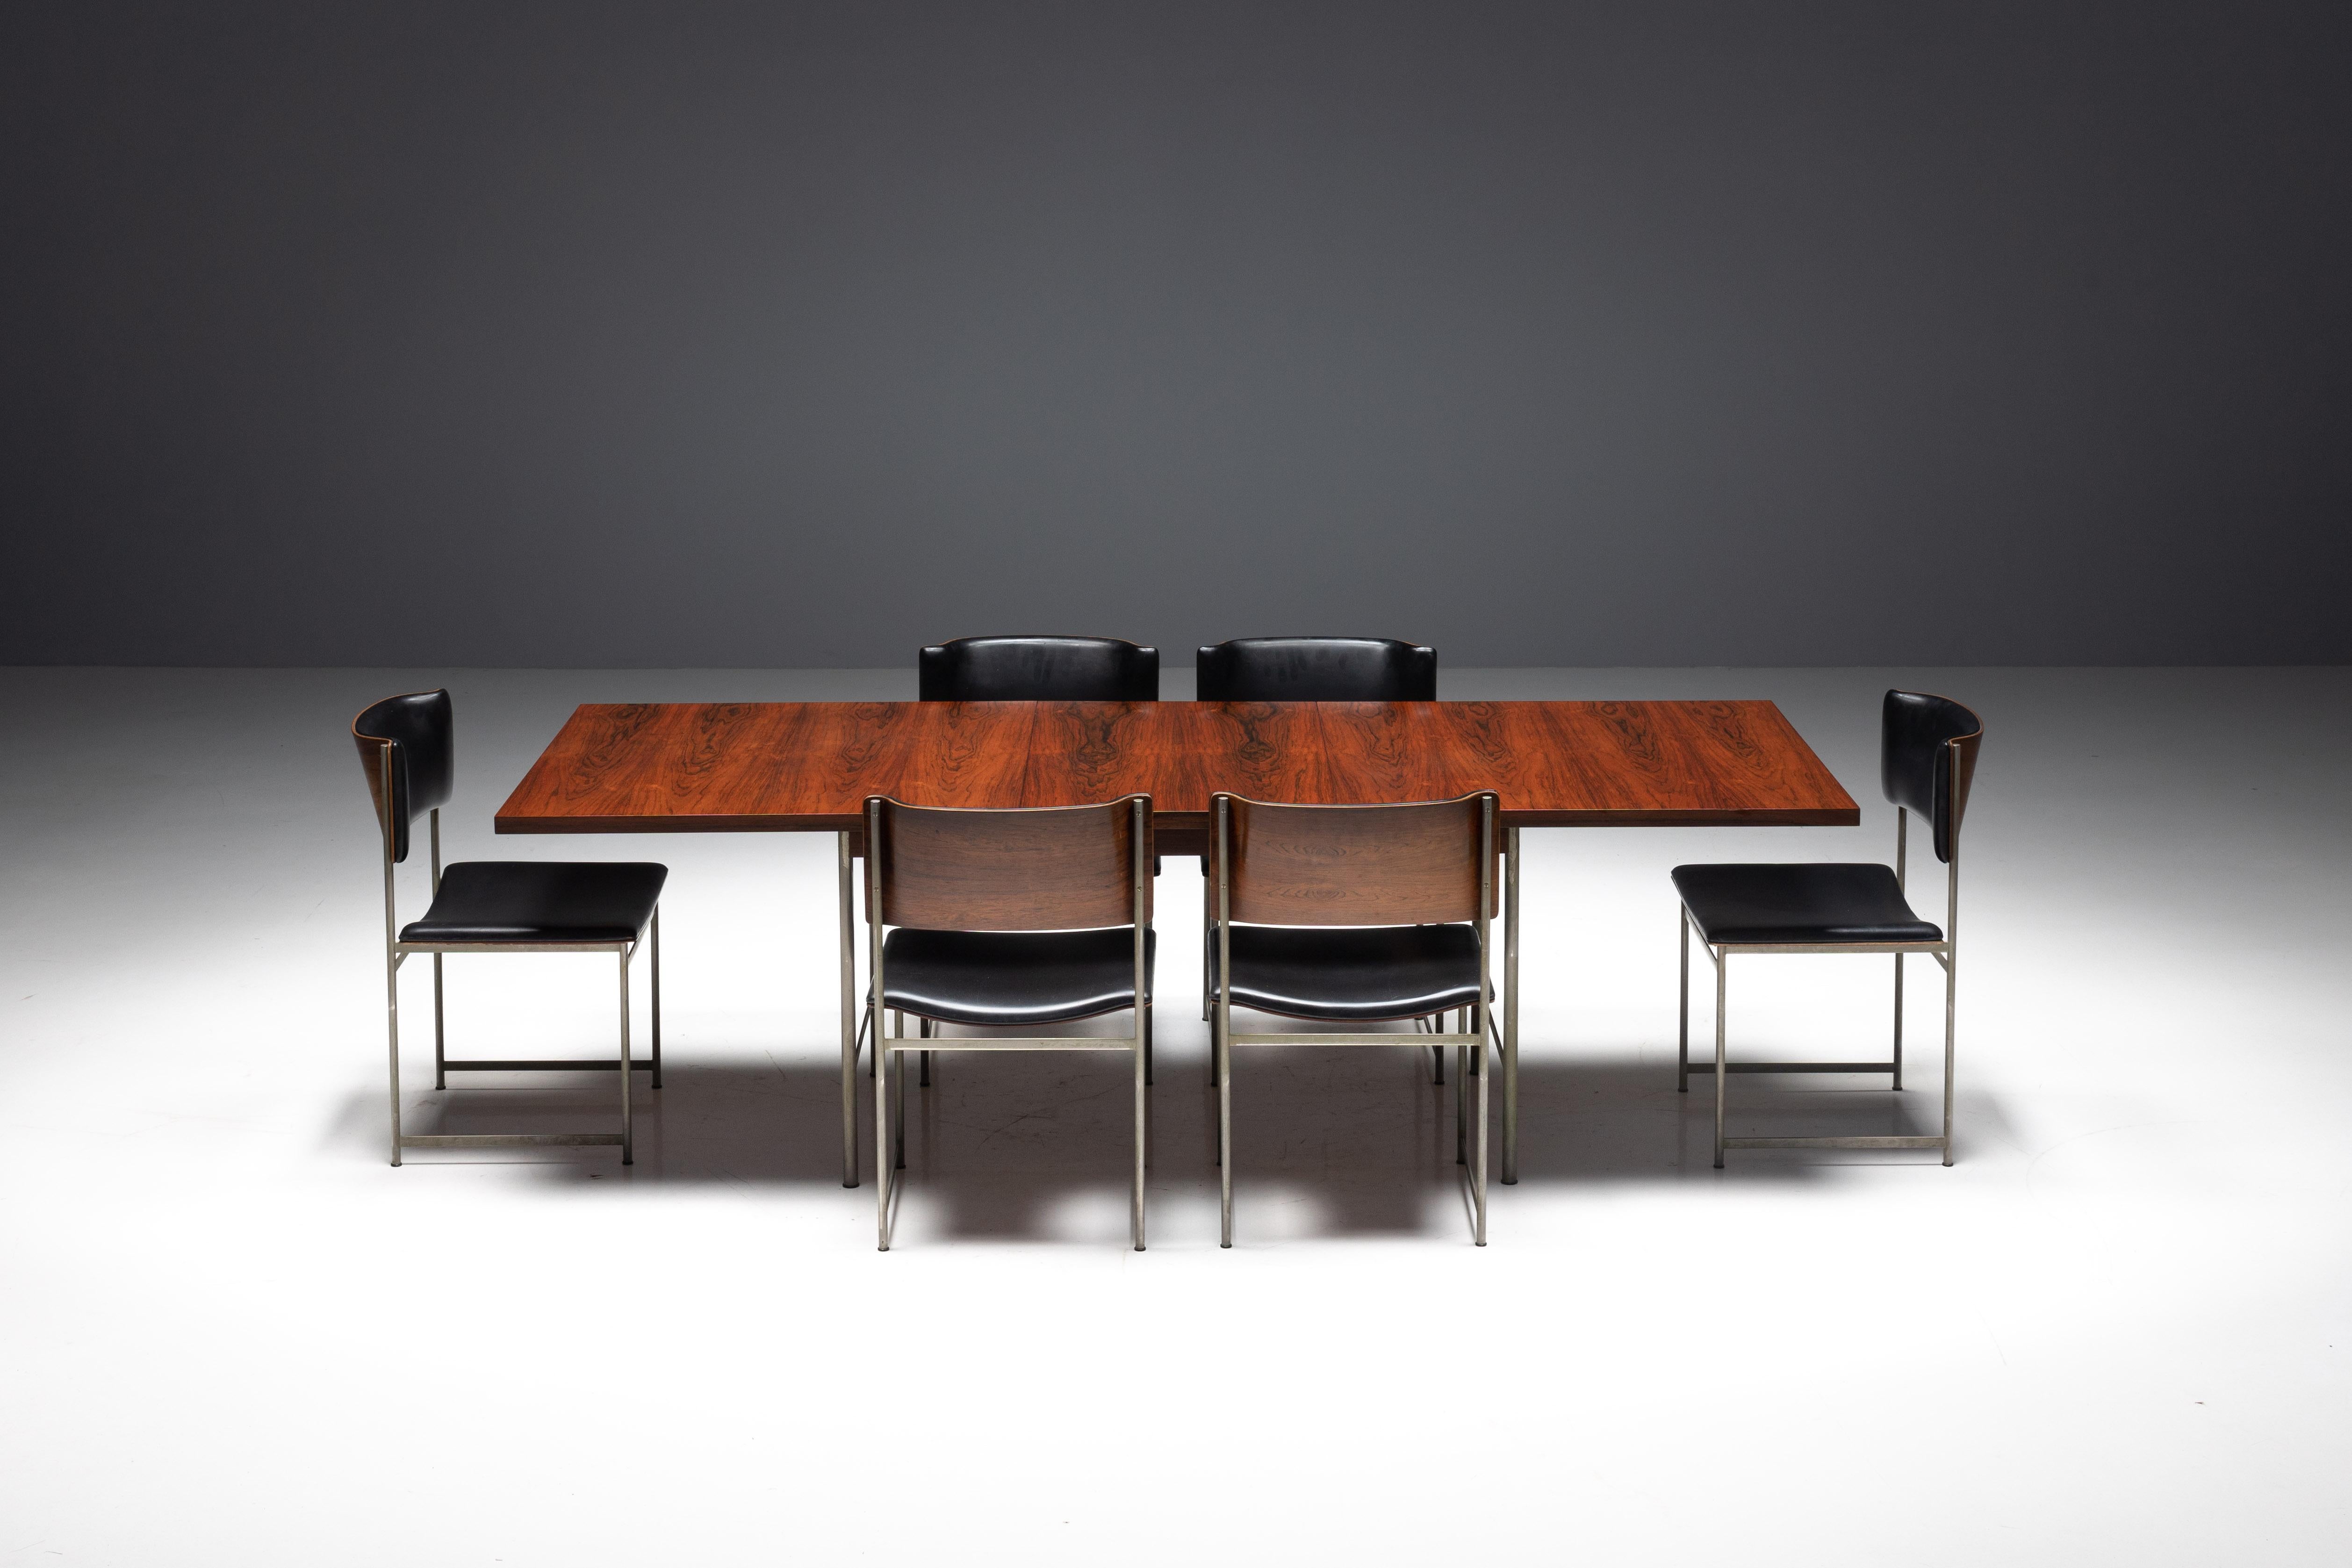 SM08 extendable dining table by Cees Braakman for Pastoe, crafted in the Netherlands during the 1960s. The table features sleek metal legs that provide a sturdy and stylish foundation, complemented by a rosewood veneer tabletop. Imbued with warmth